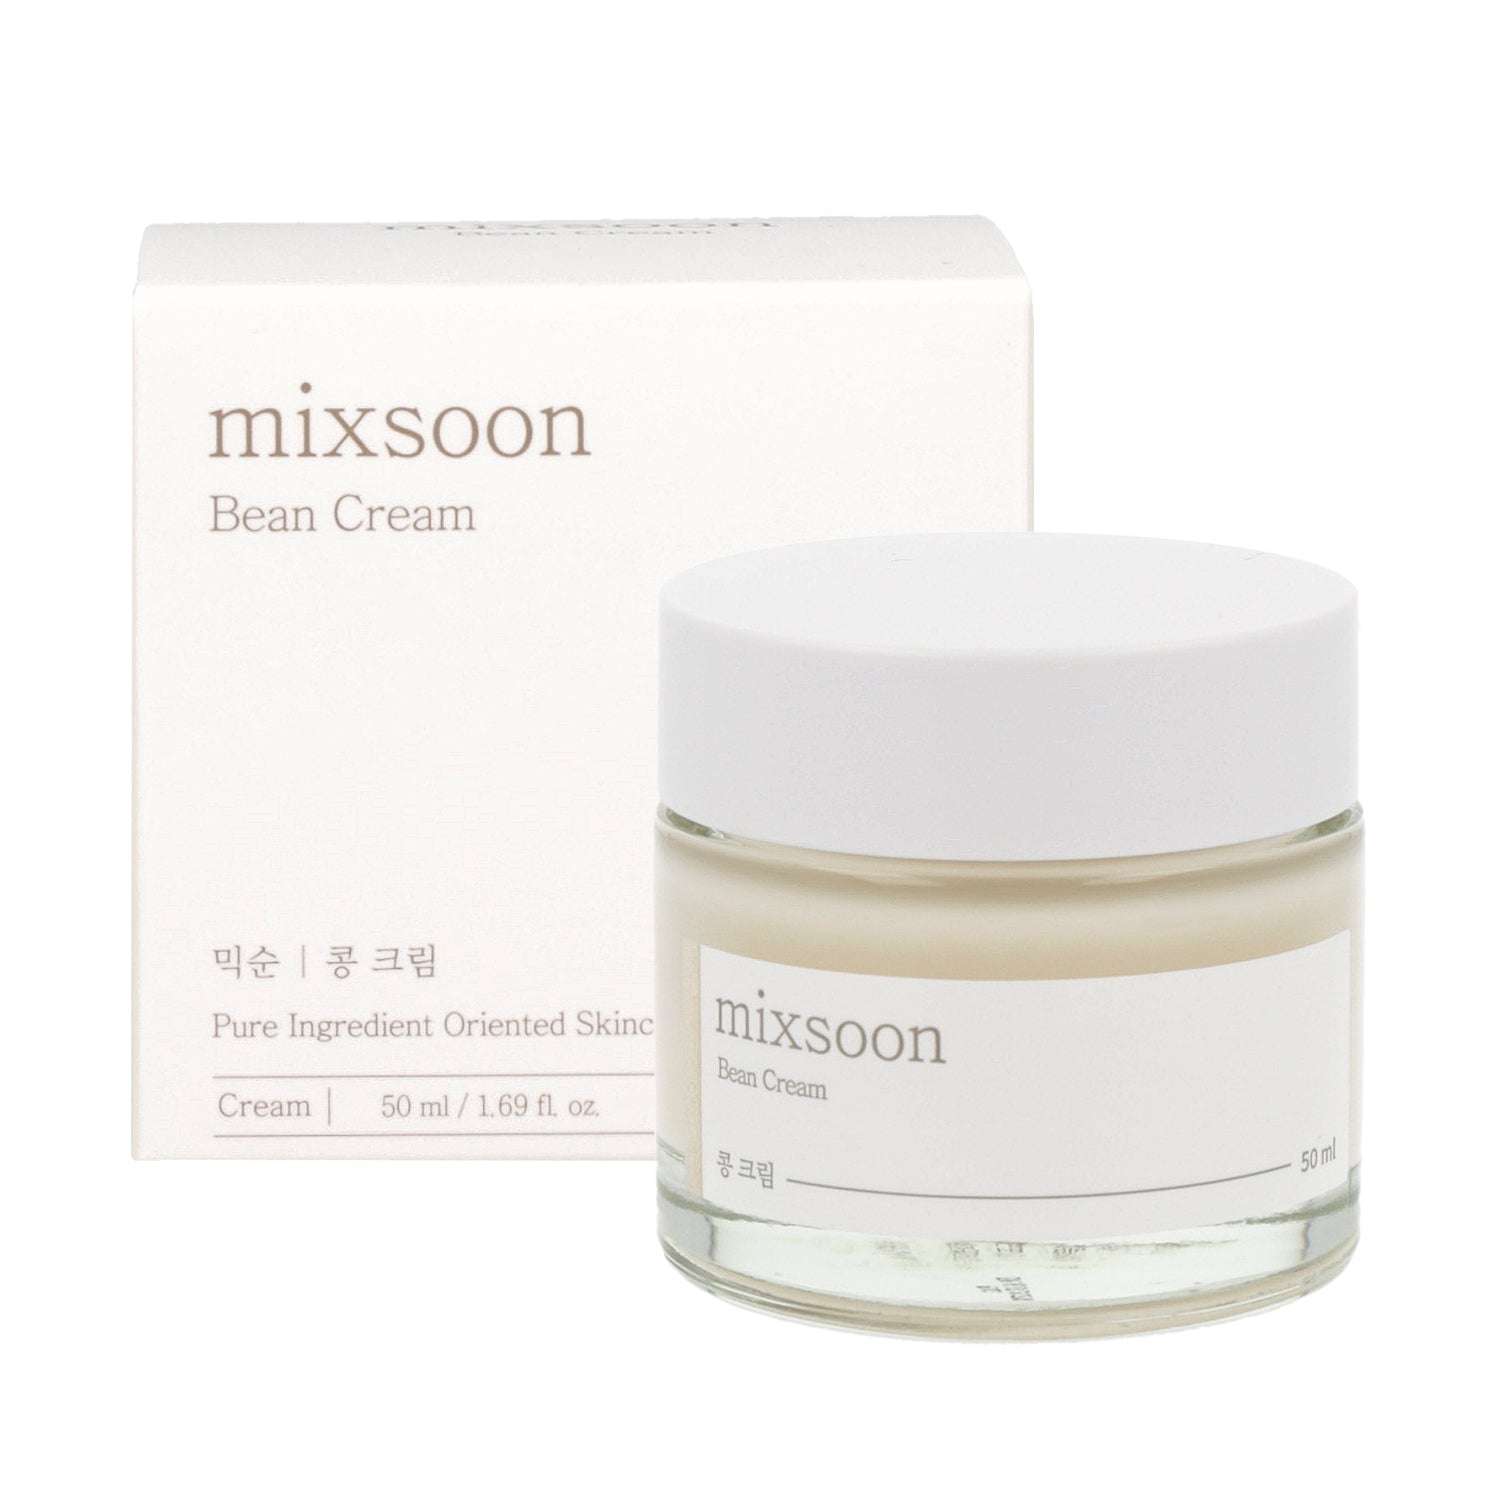 A 50ml bottle of mixsoon Bean Cream, a delightful blend of mixed beans, exuding a creamy texture and rich flavor.